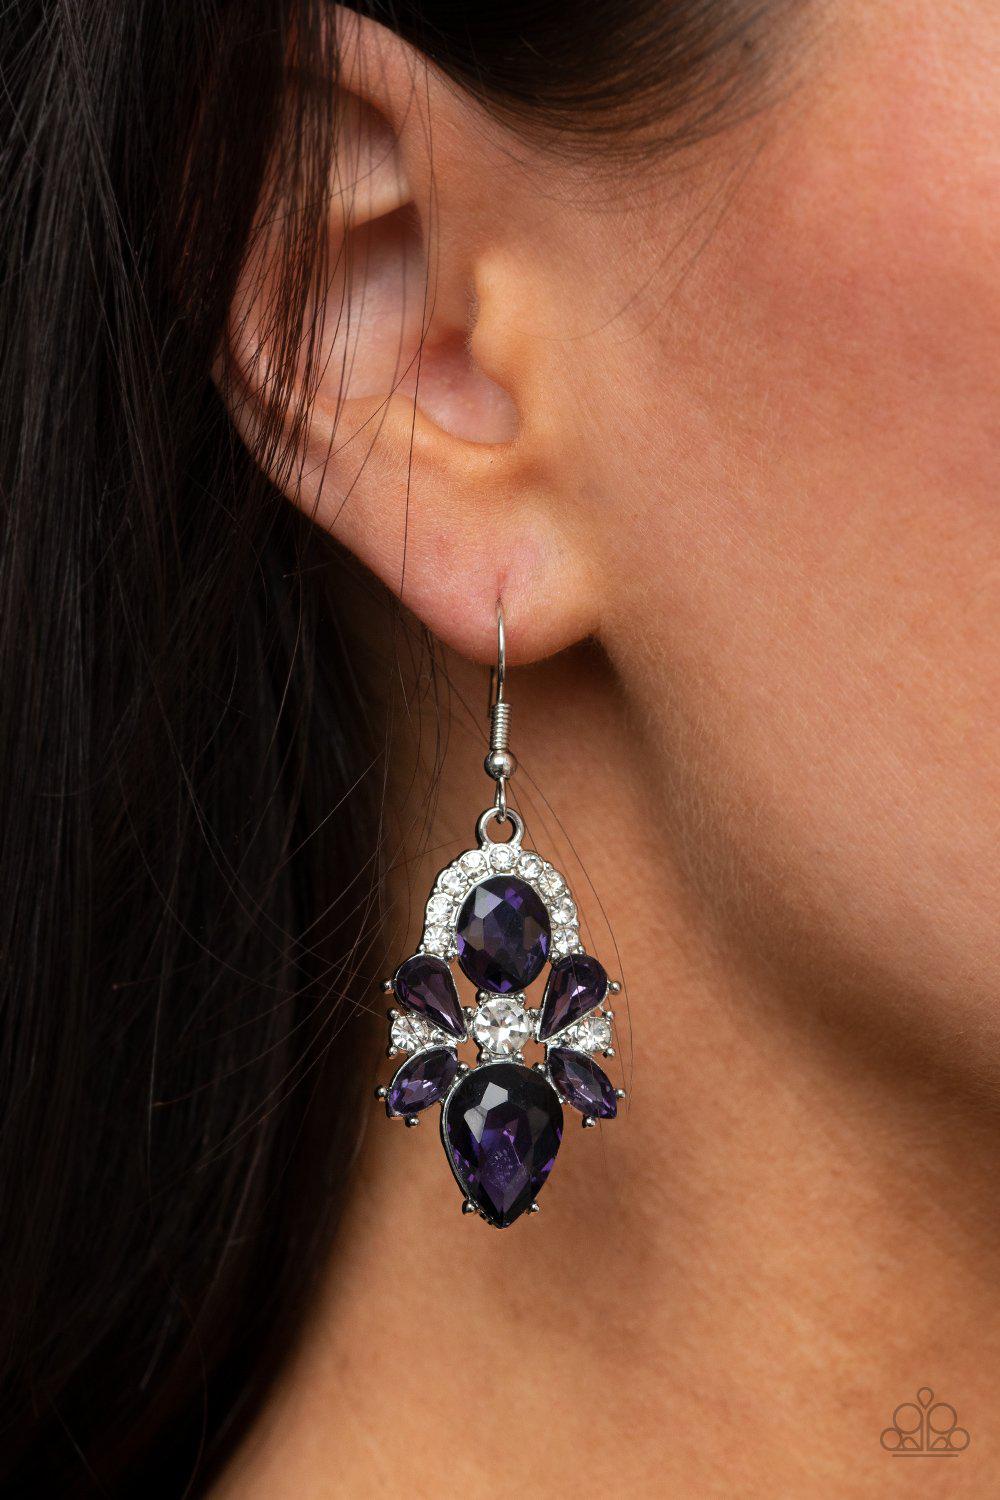 Stunning Starlet Purple and White Rhinestone Earrings - Paparazzi Accessories- model - CarasShop.com - $5 Jewelry by Cara Jewels